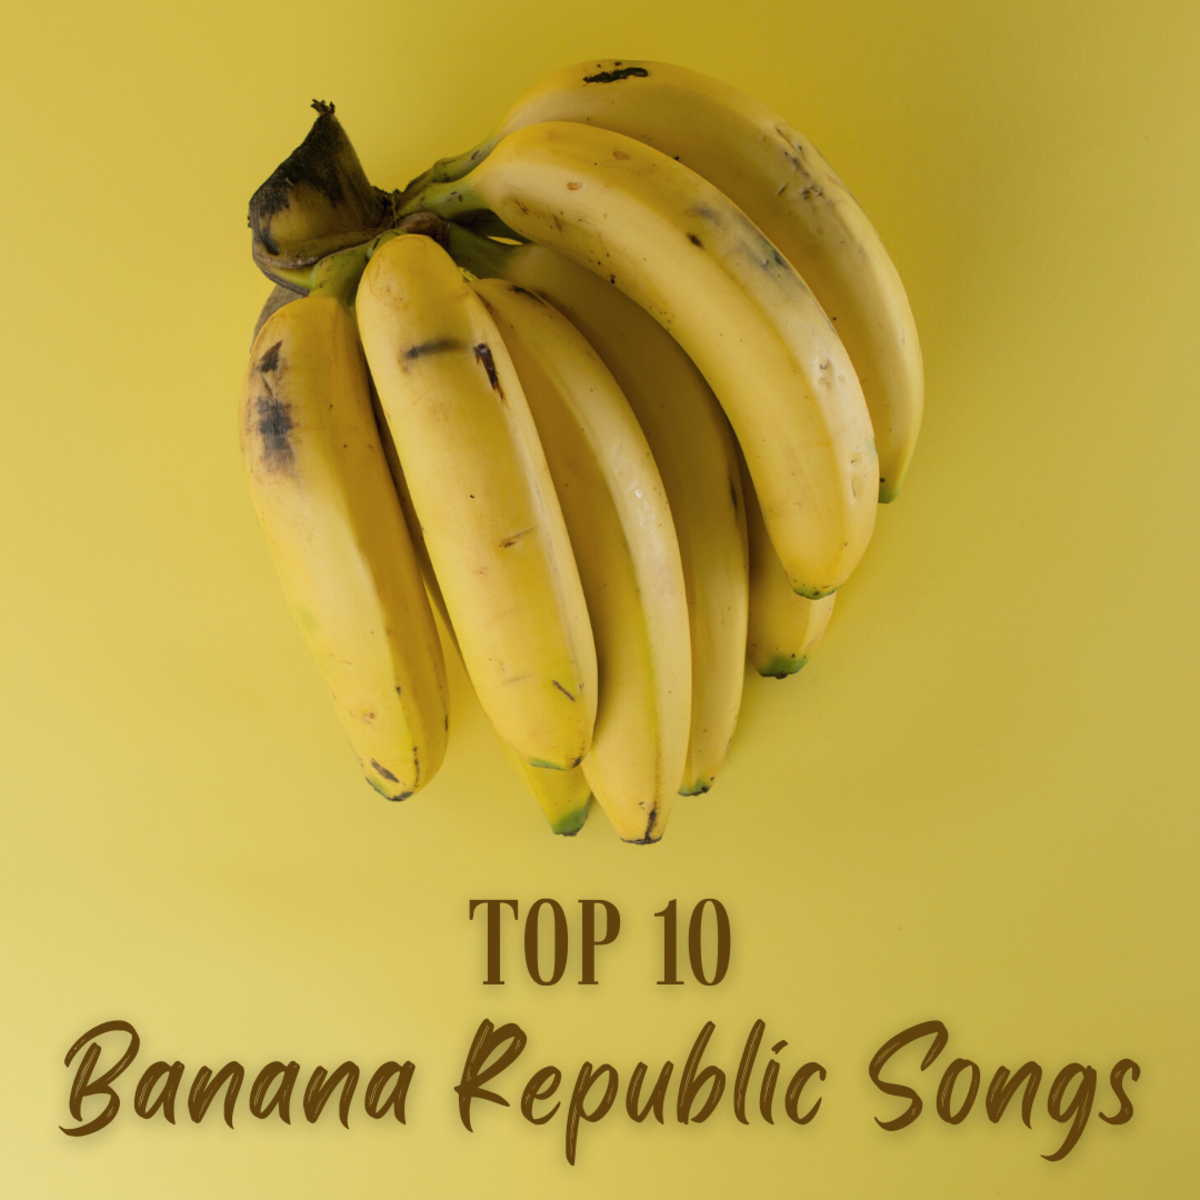 10 Songs About Banana Republics